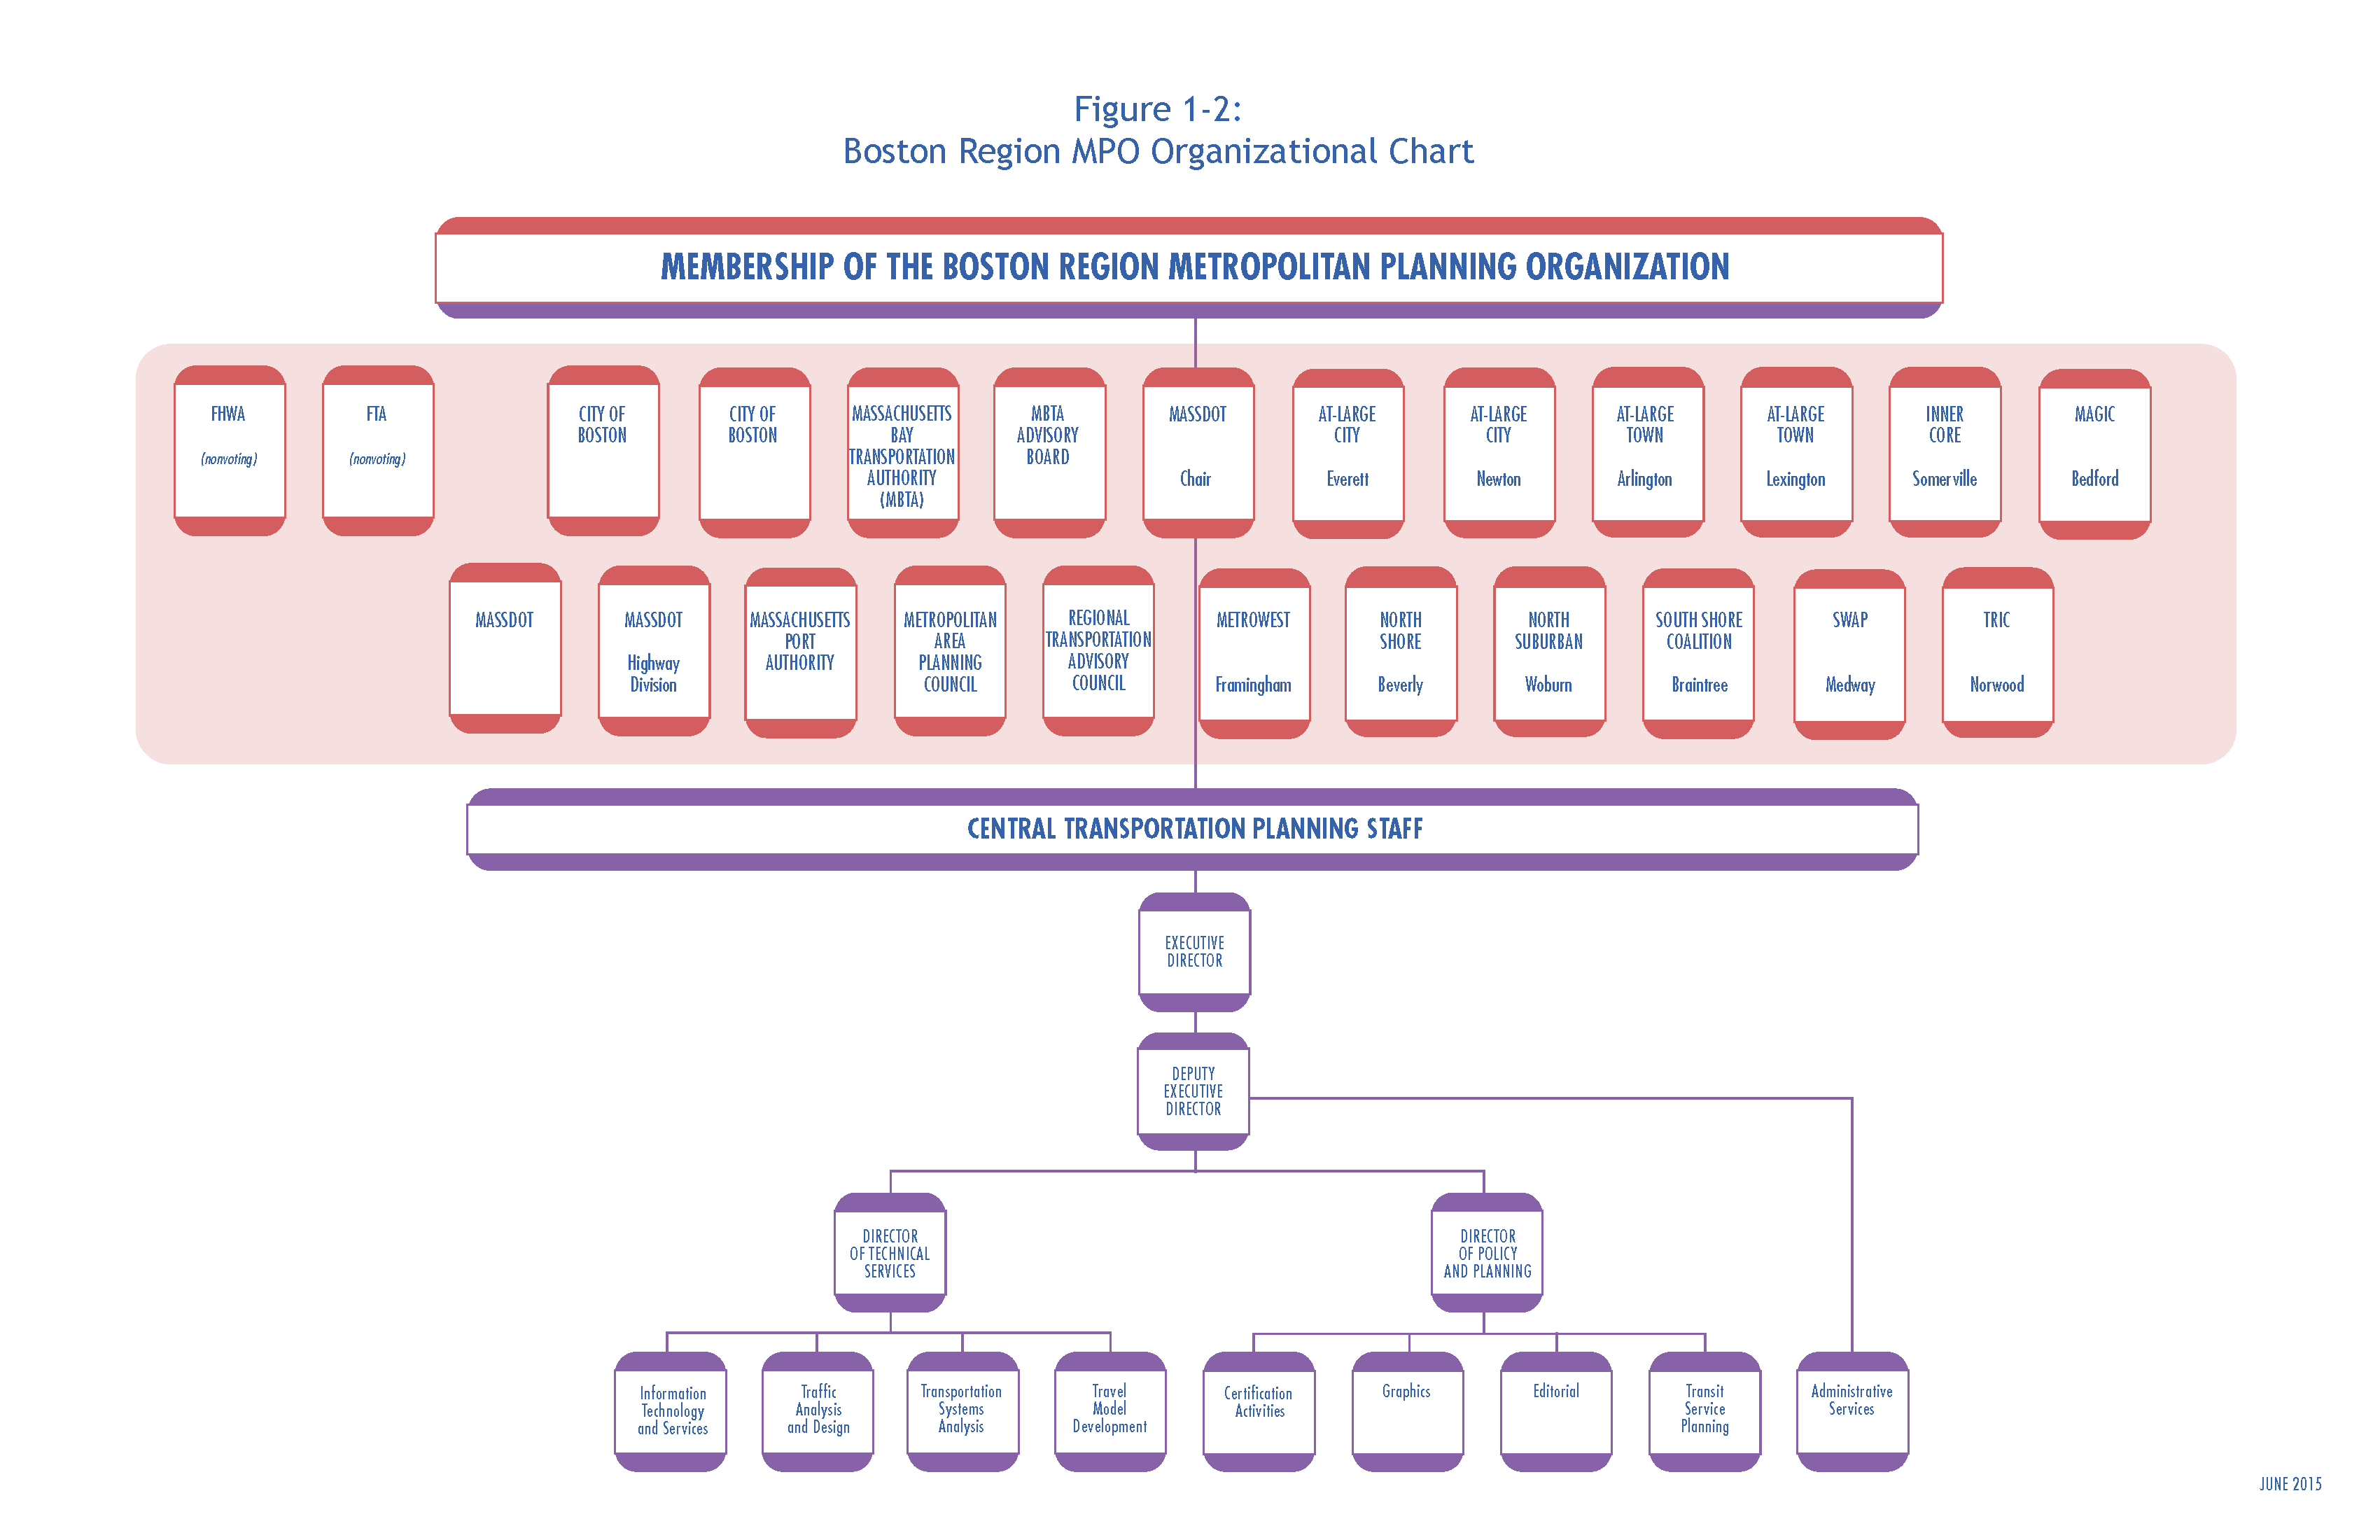 Figure 1-2 Boston Region MPO Organizational chart: This figure shows the membership of the Boston Region Metropolitan Planning Organization and the groups that fall within the Central Transportation Planning Staff.